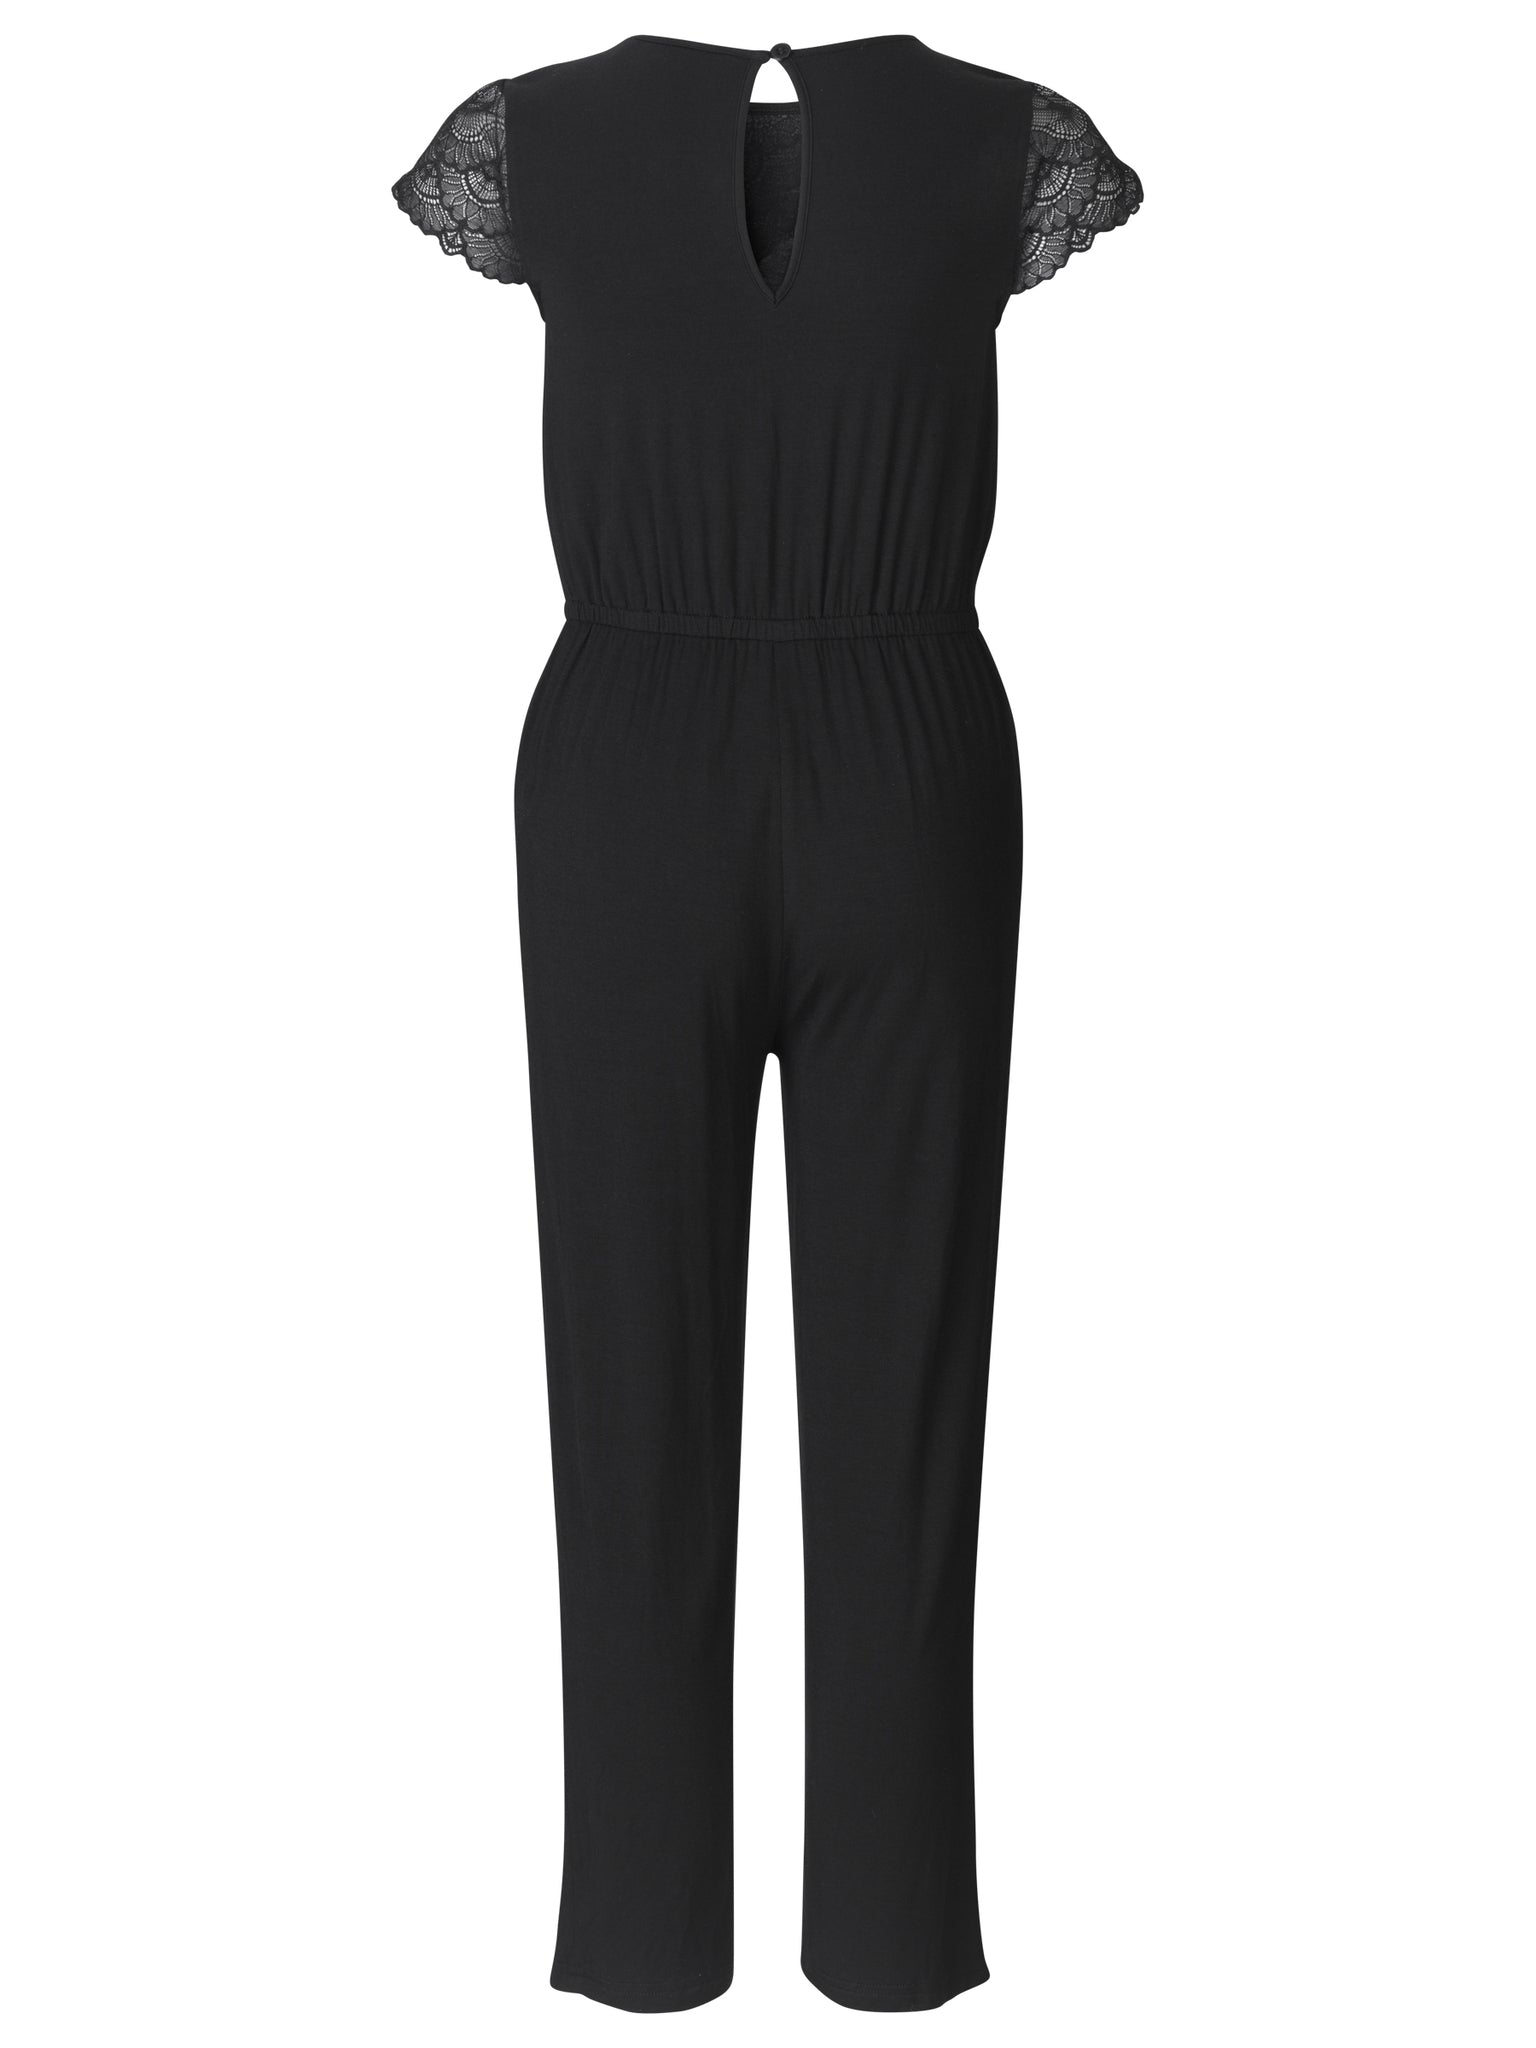 Jumpsuit for girls